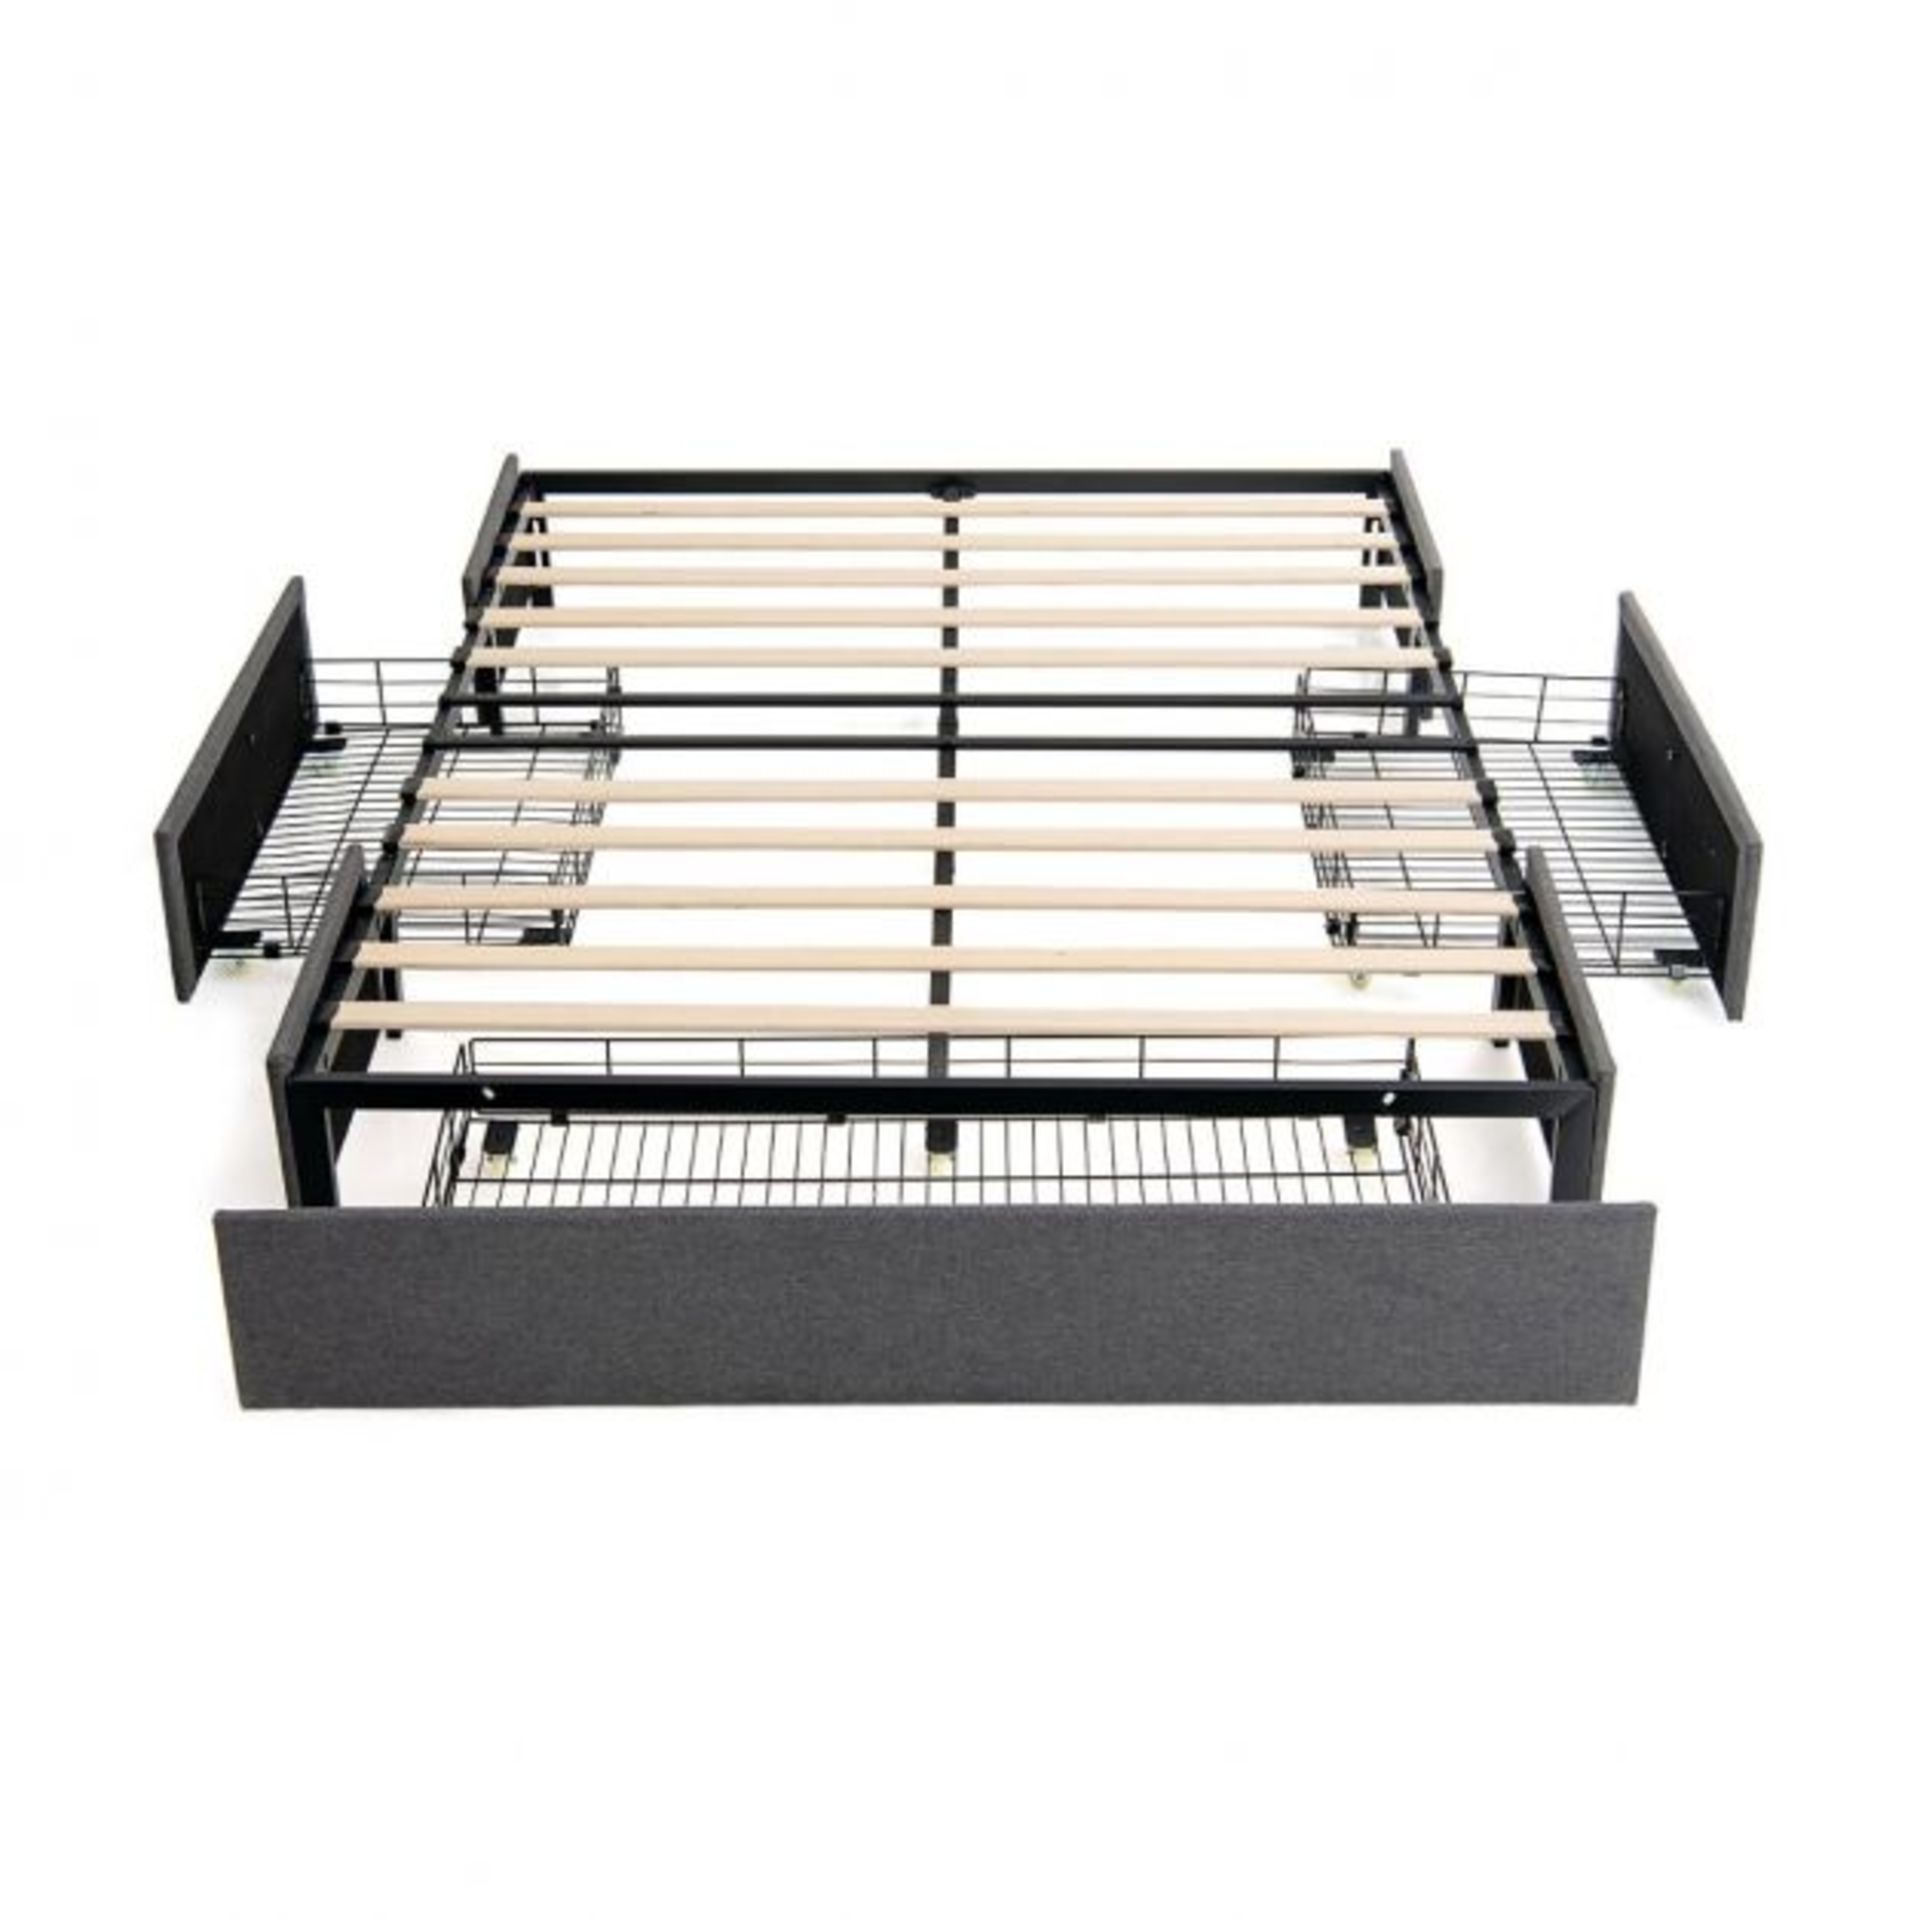 King Size Bed Frame with 3 Underbed Storage Drawers - RRP £219.99 (LOCATION - H/S R 4.4)